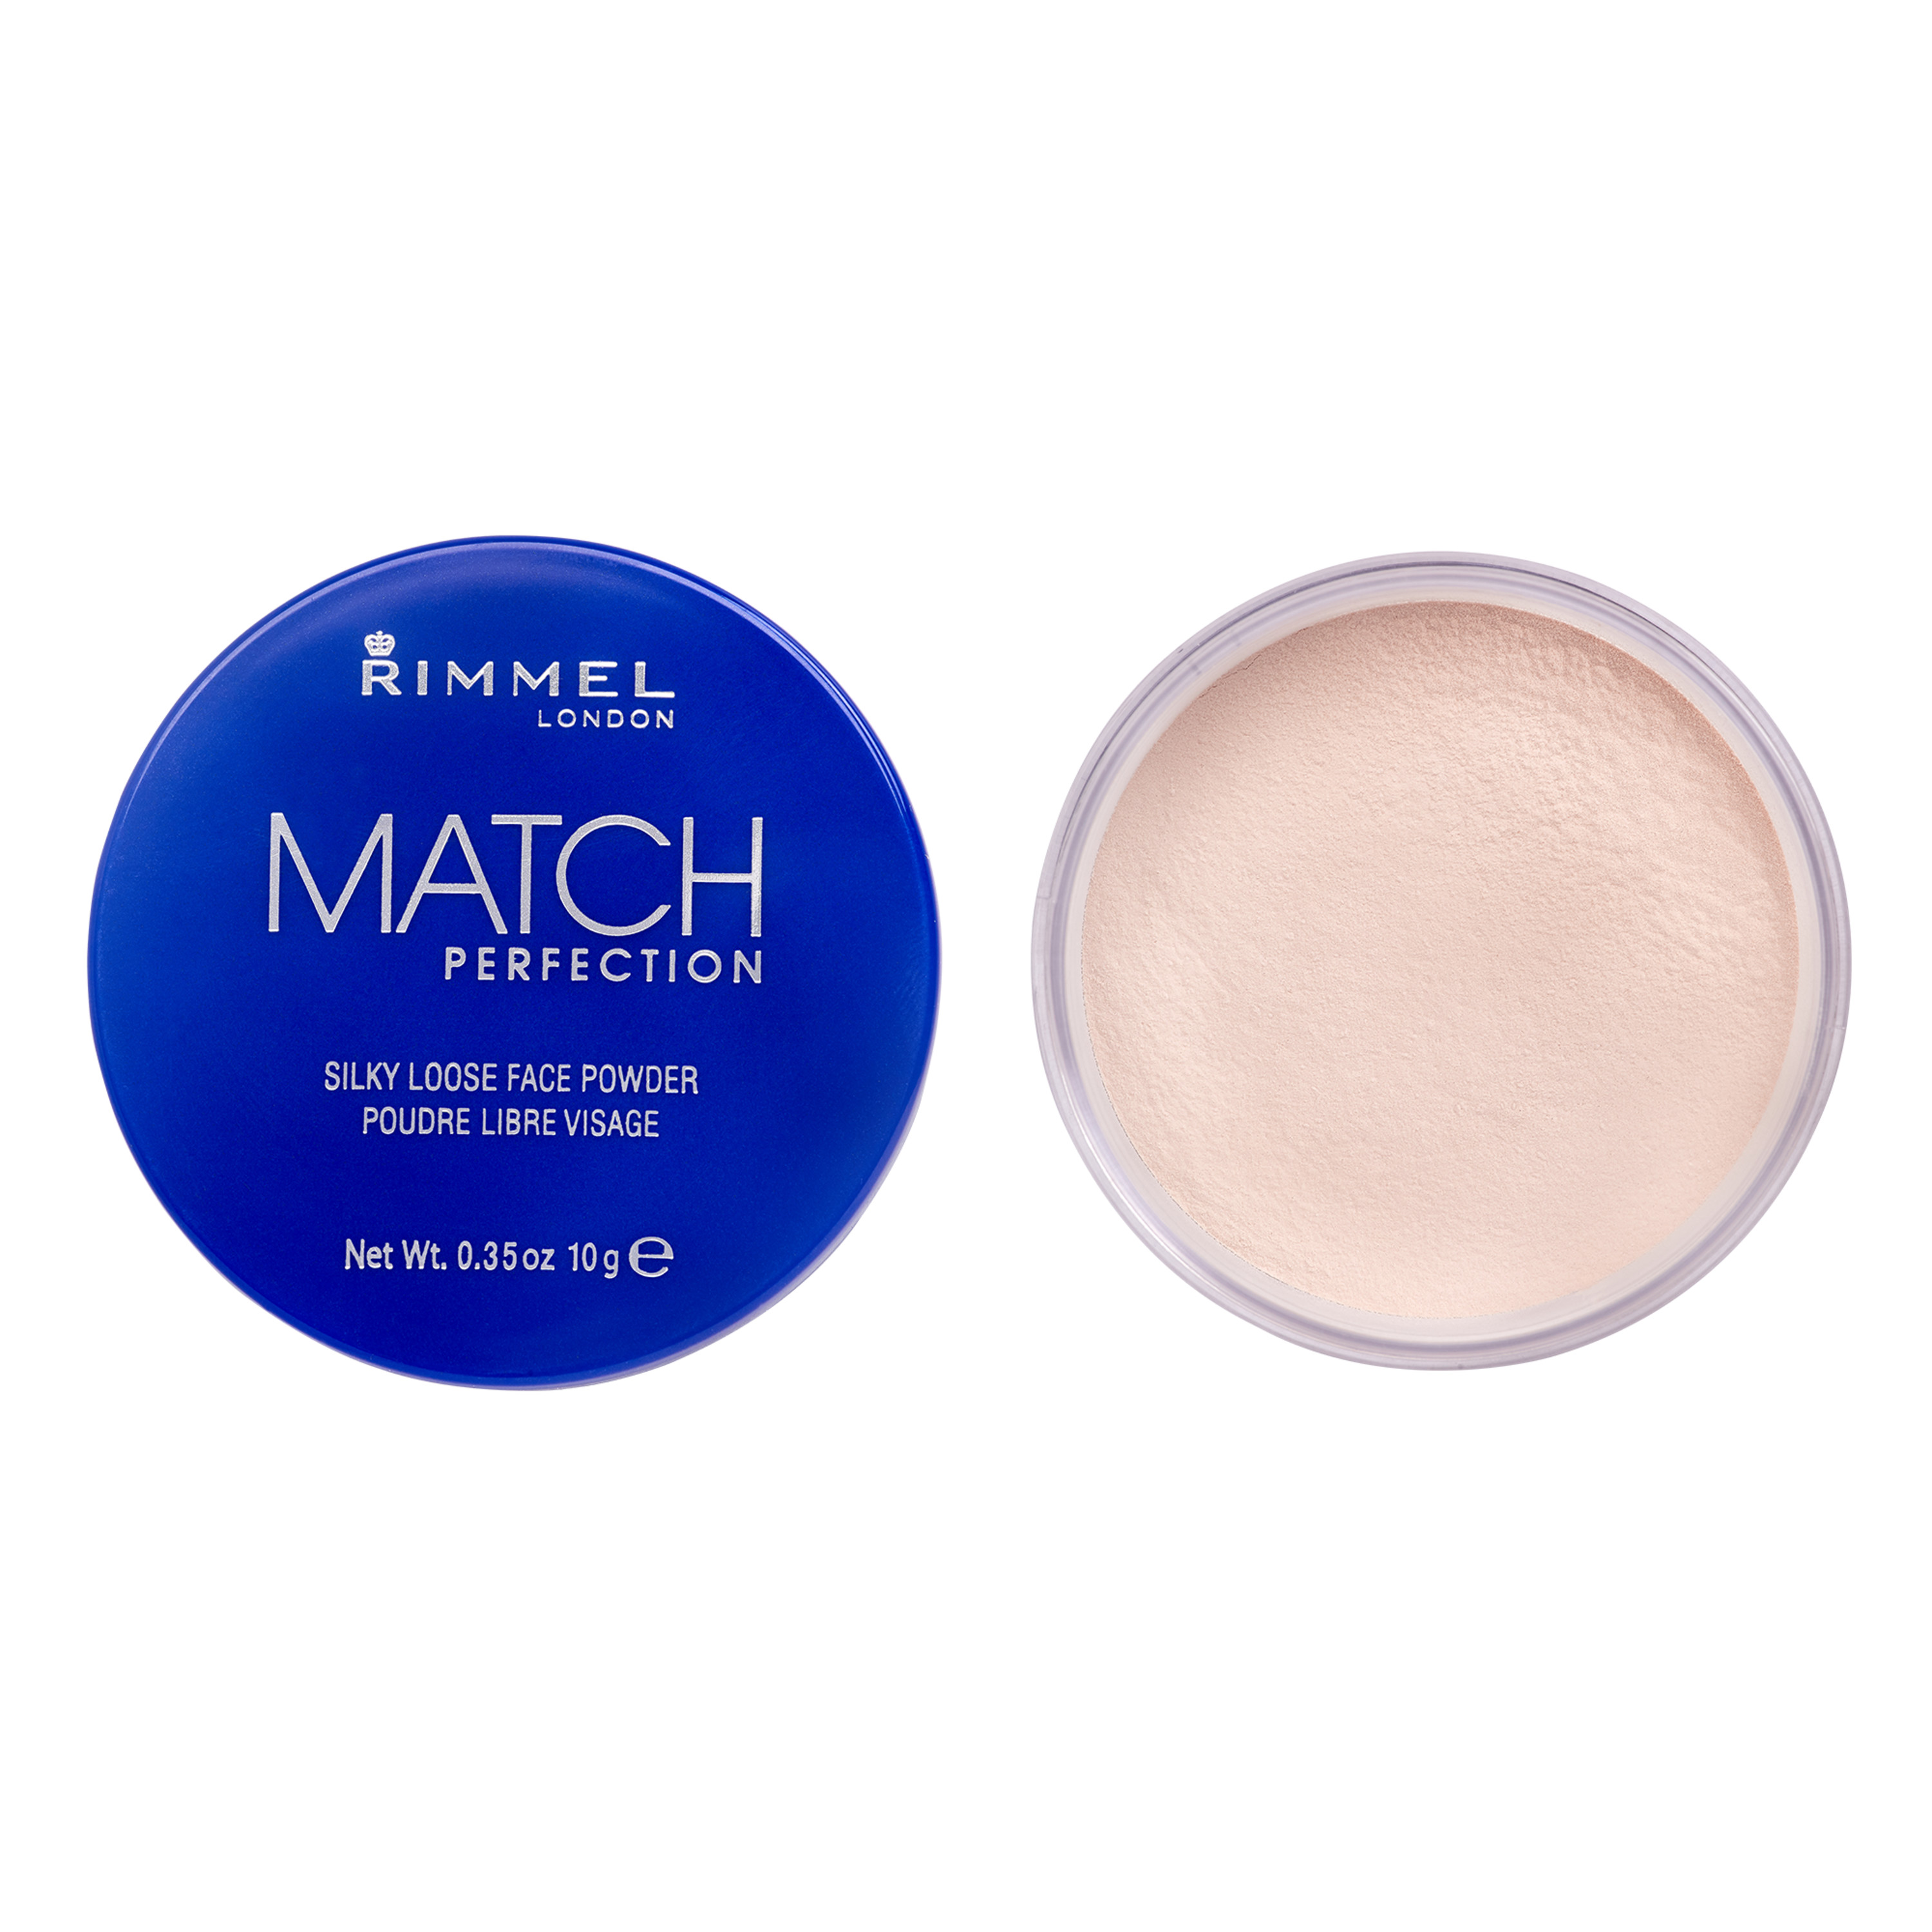 Rimmel London Match Perfection Silky Loose Face Powder, Transparent - image 1 of 10